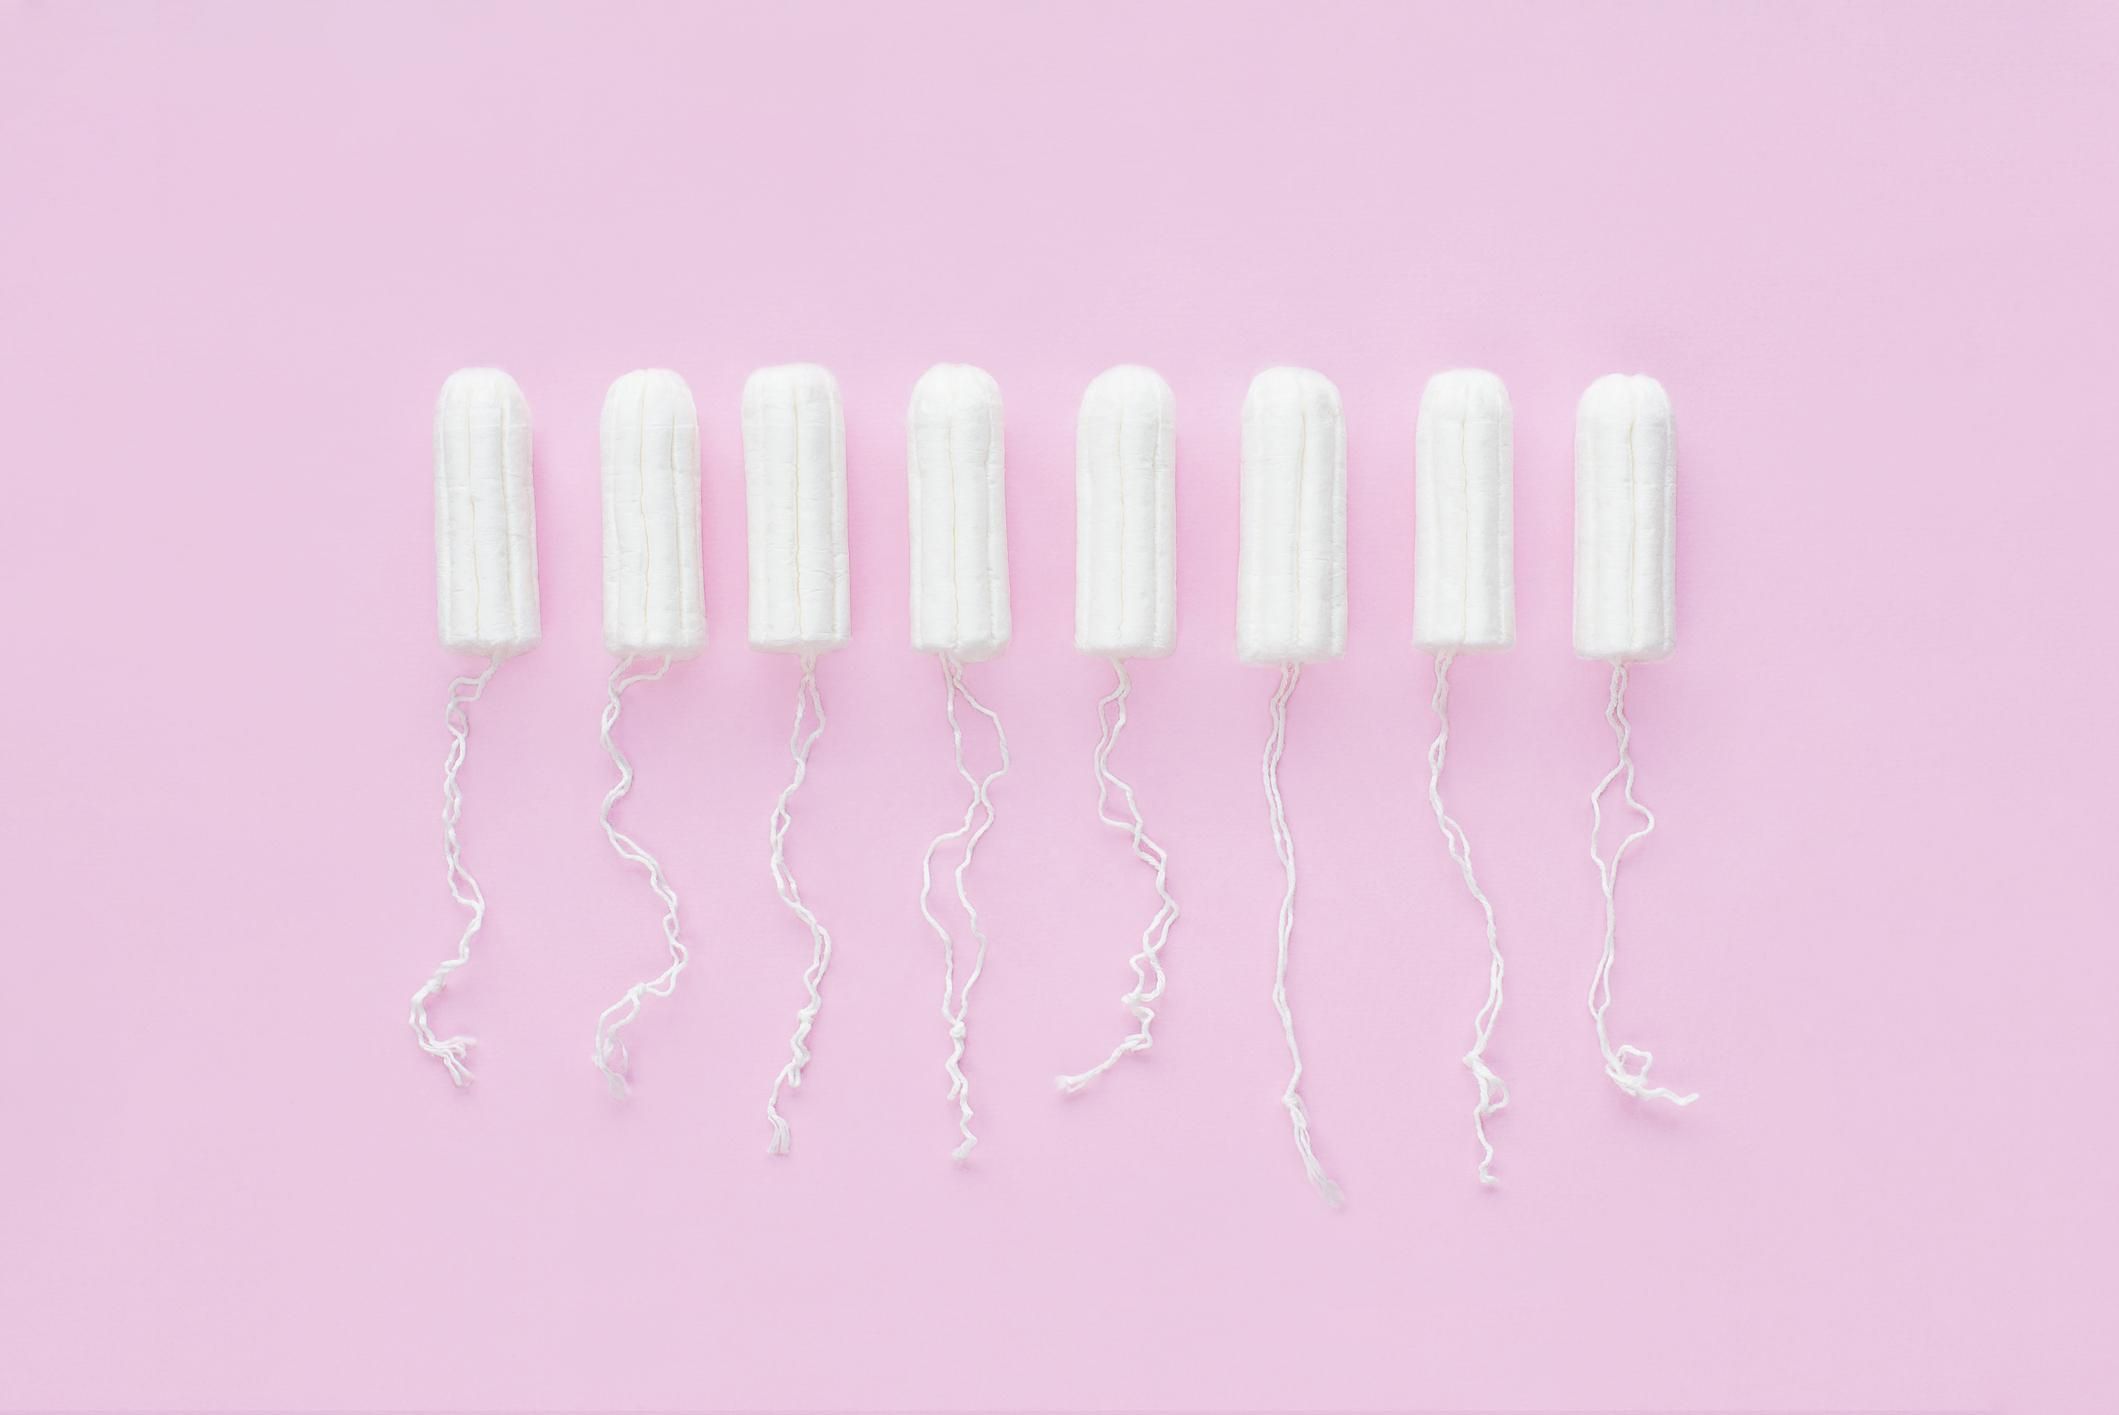 Menstrual period concept. Woman hygiene protection. Cotton tampons on pink background.